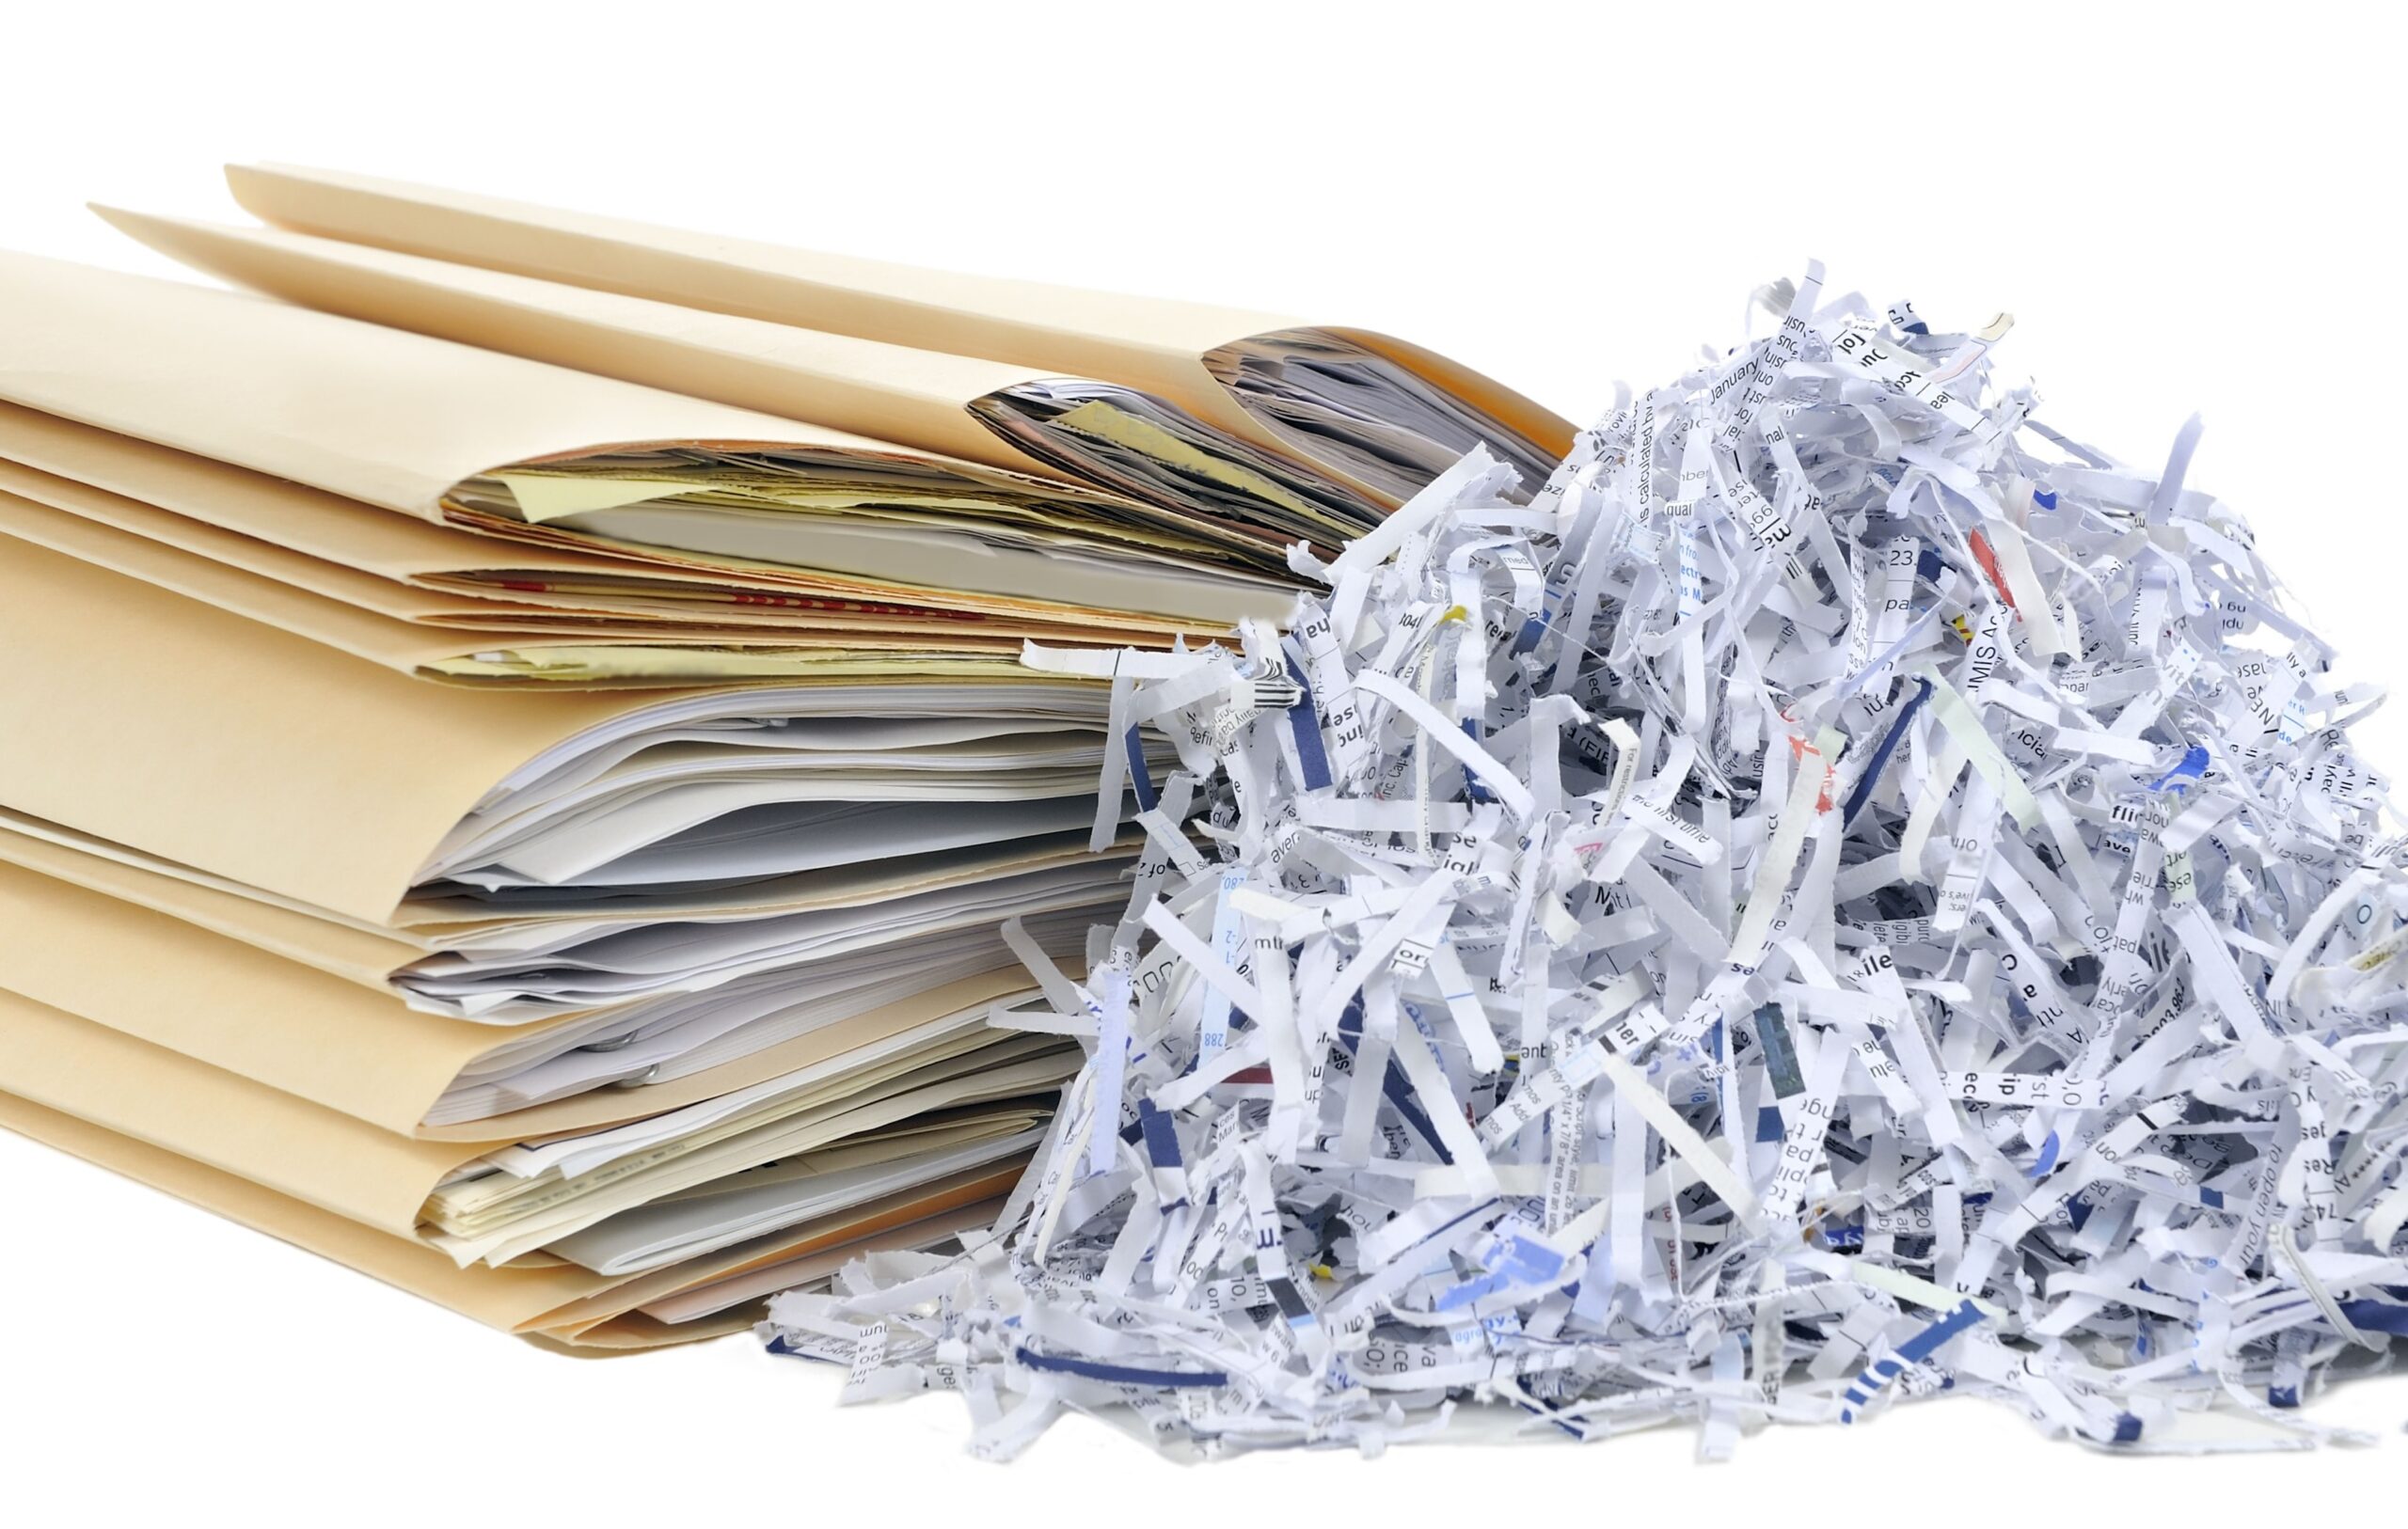 NCSS Receives Document Shredding Contract for Pennsylvania State Agencies